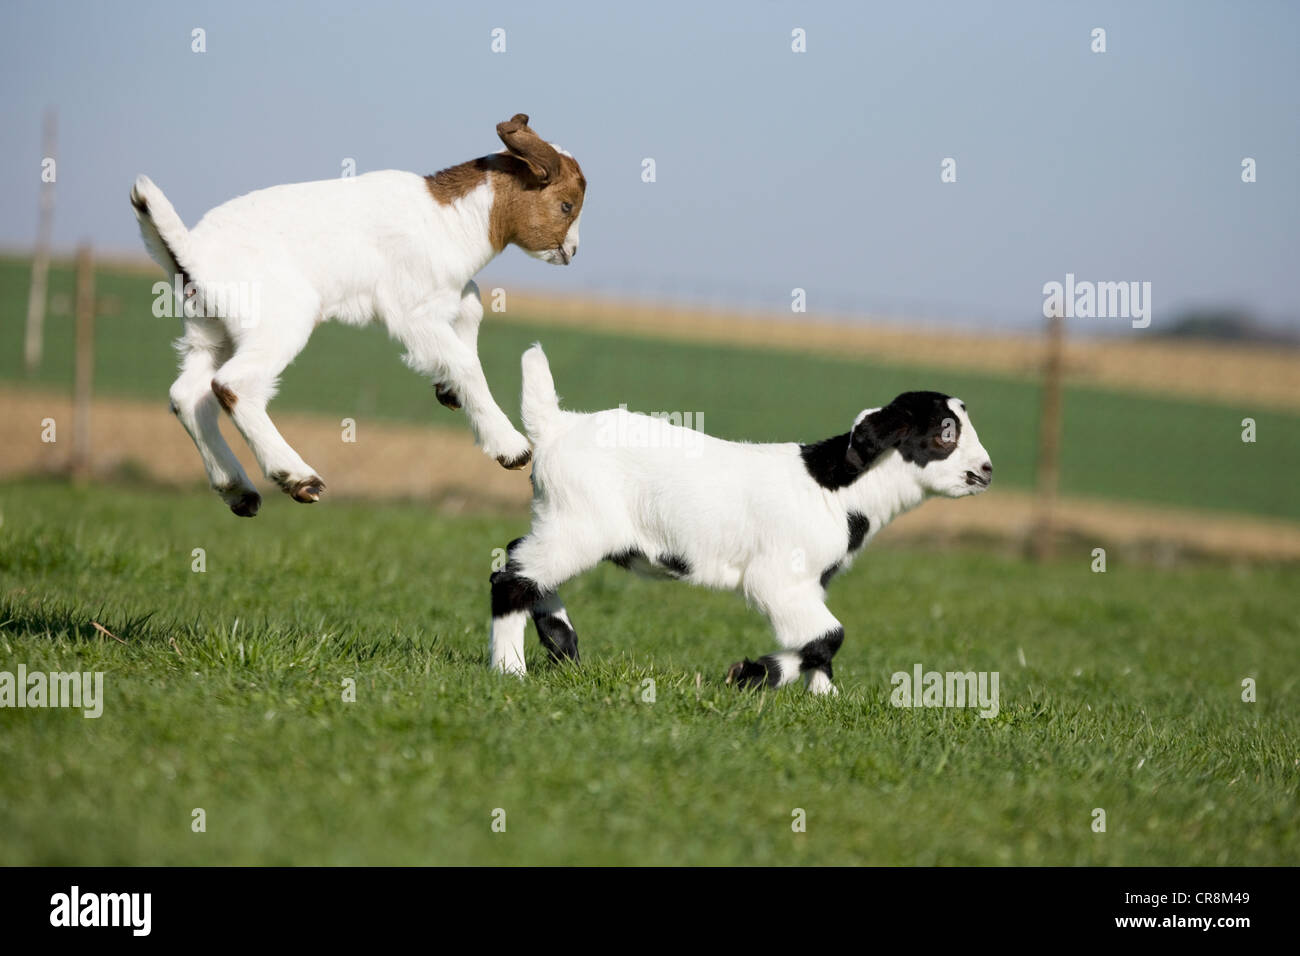 Two goat kids jumping Stock Photo